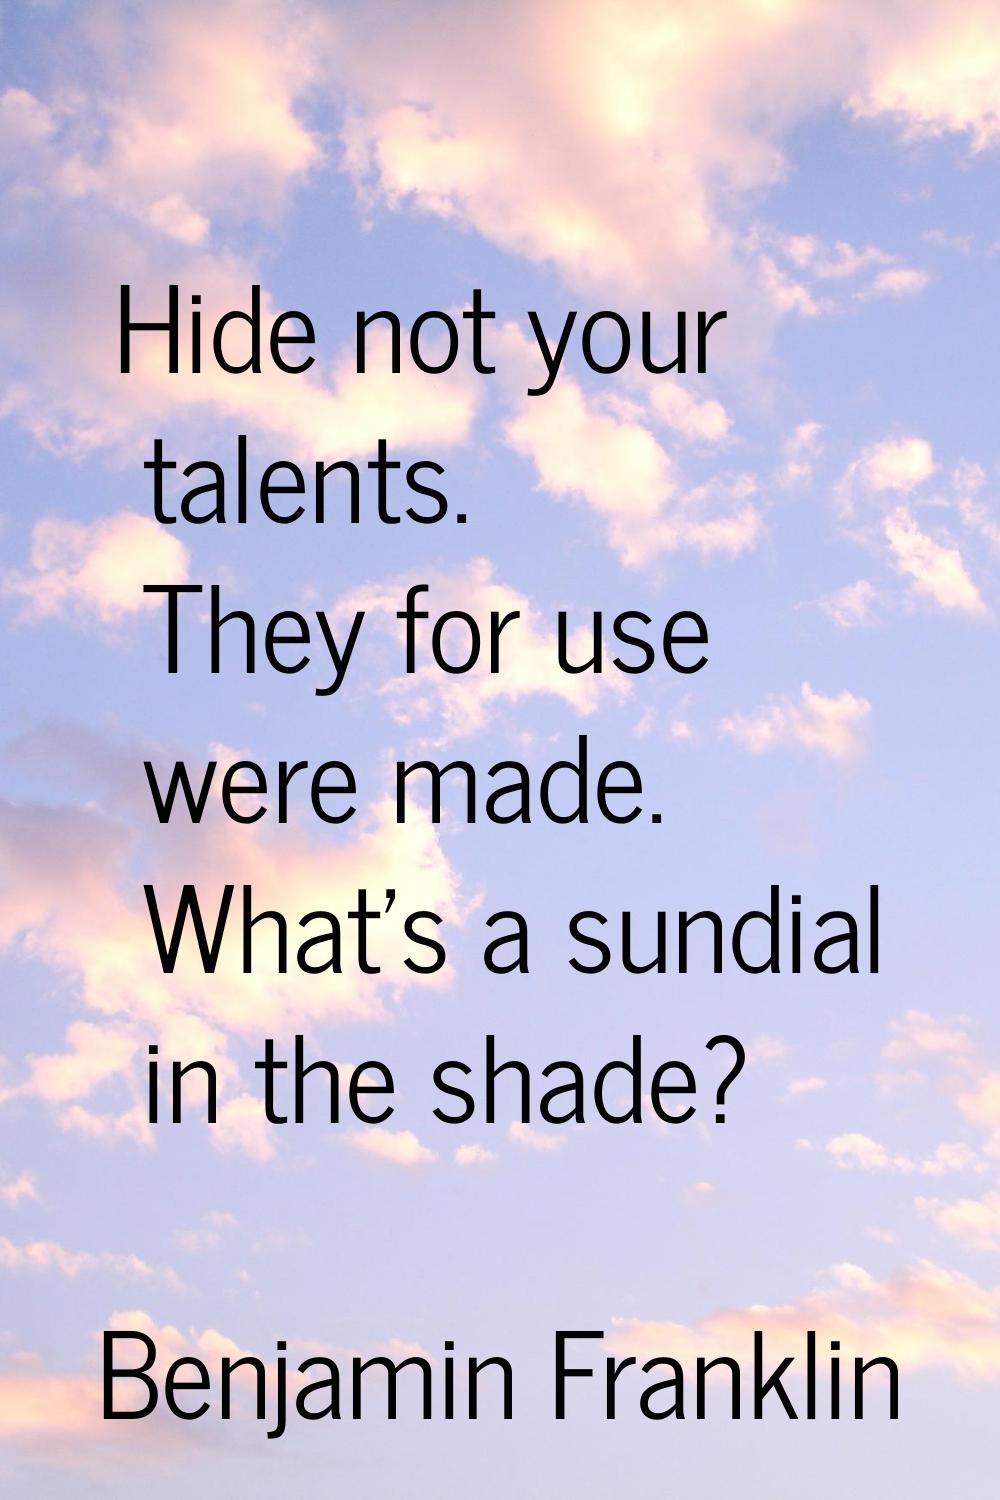 Hide not your talents. They for use were made. What's a sundial in the shade?